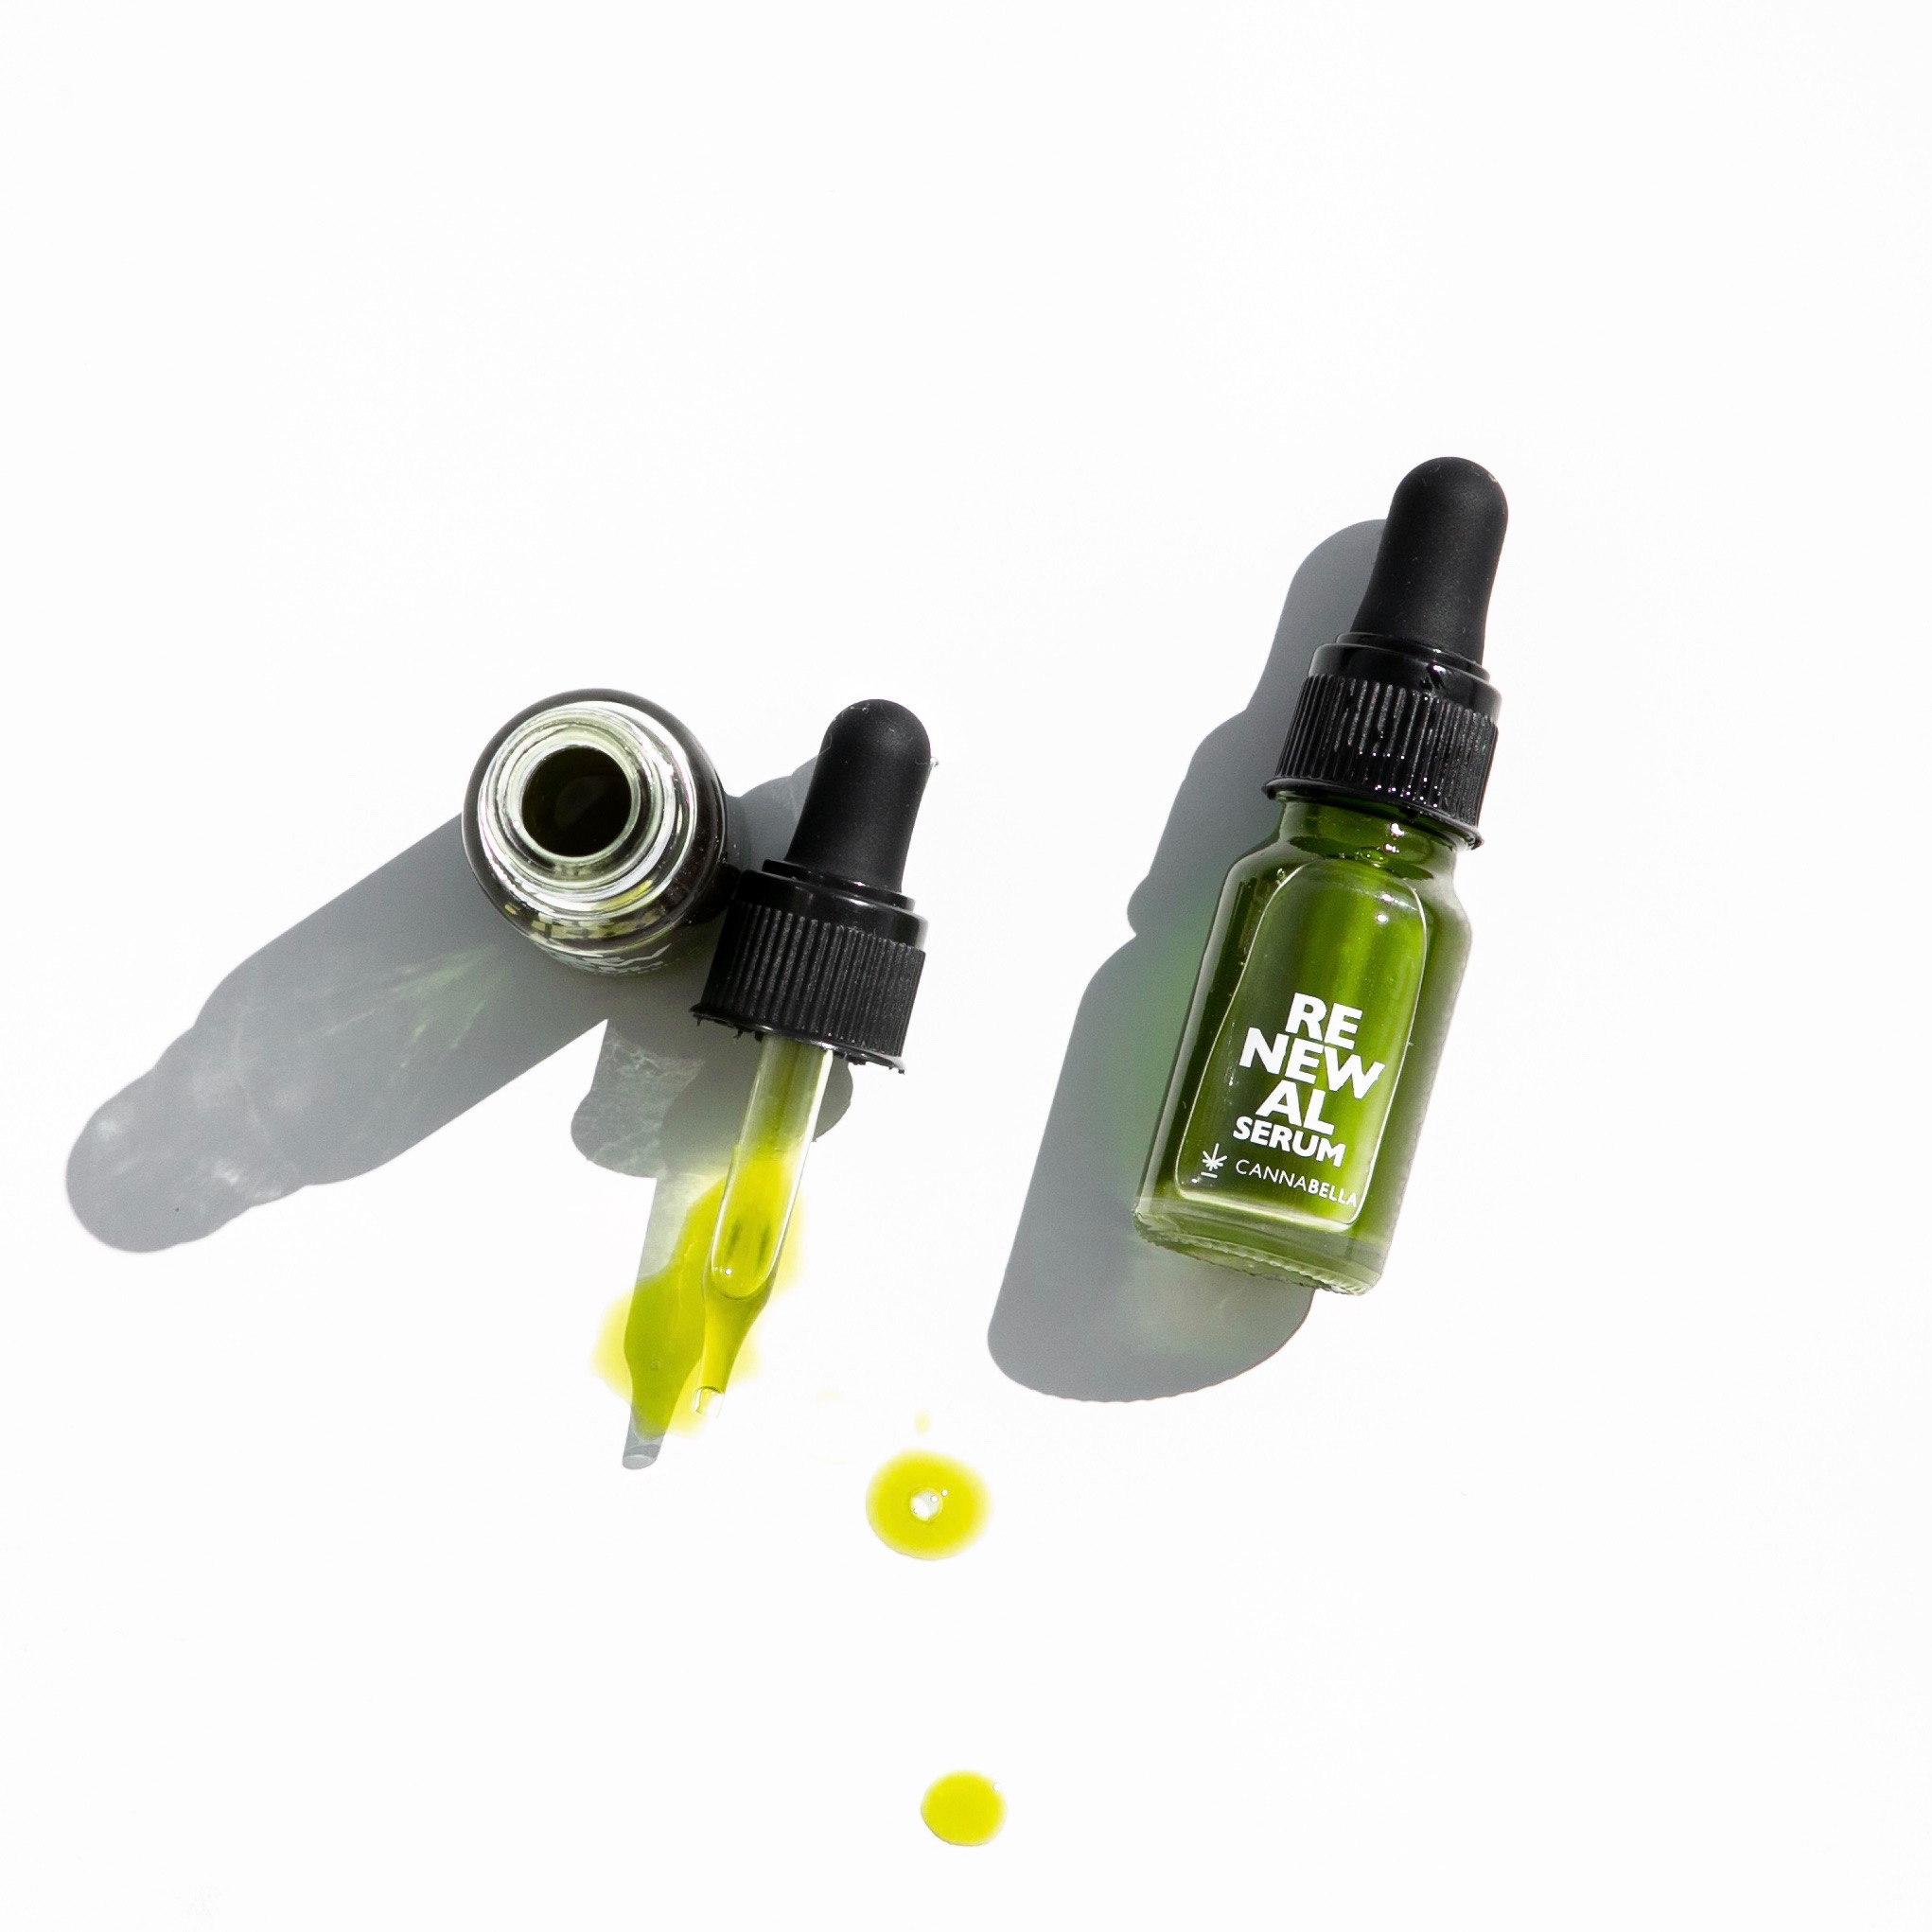 Broccoli Seed Oil for Skin, Broccoli Seed Oil for Skin, Cannabella